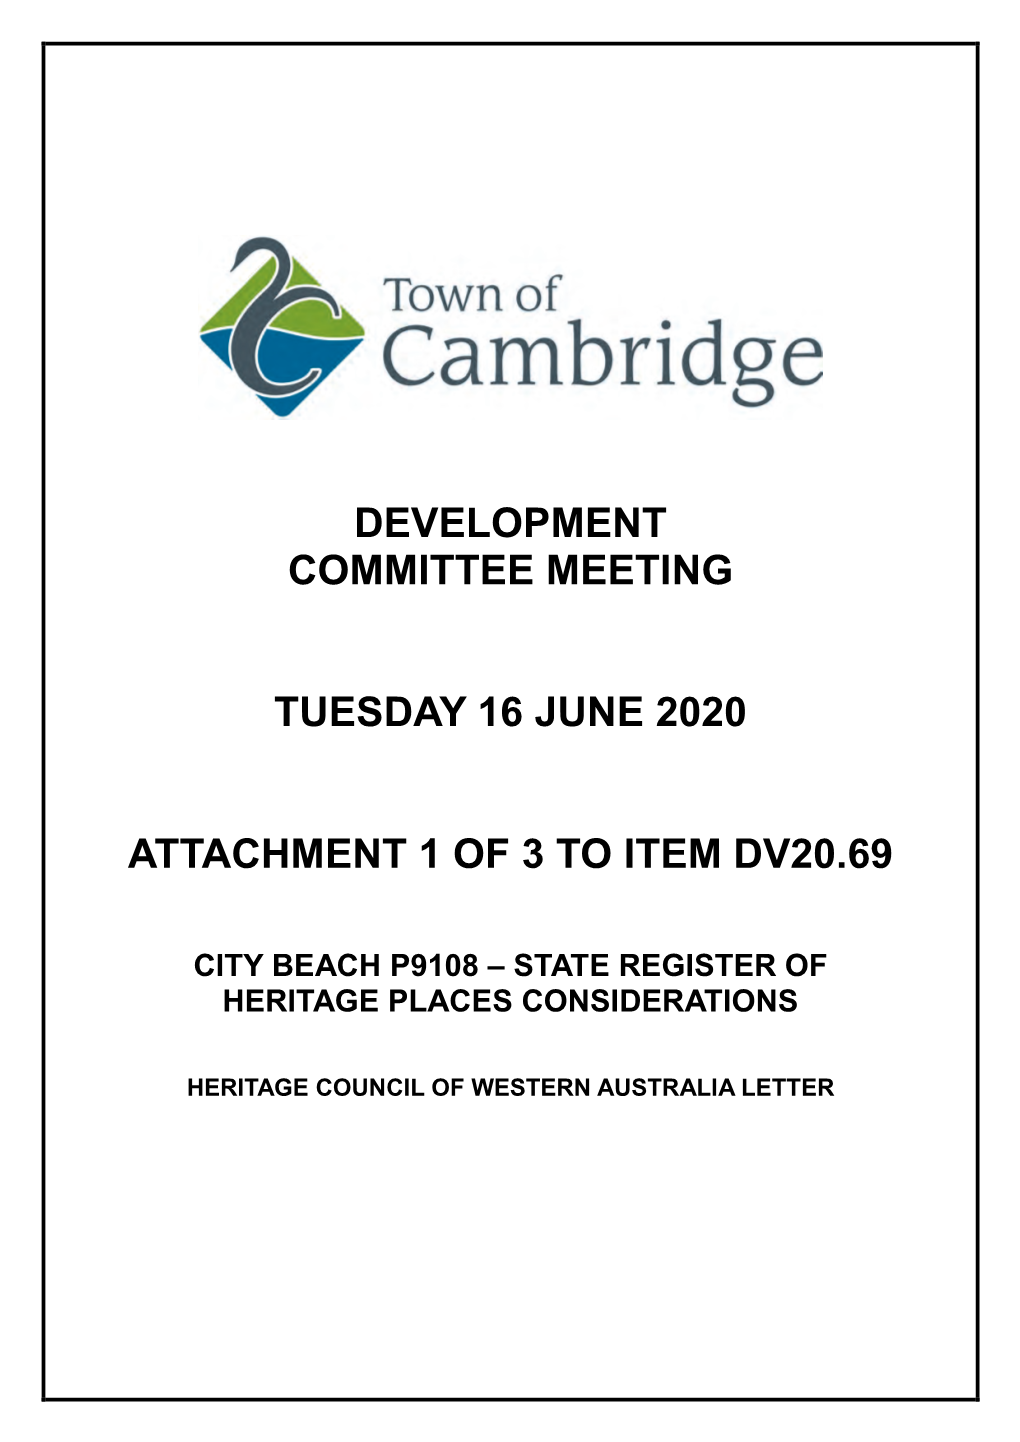 Development Committee Meeting Tuesday 16 June 2020 Attachment 1